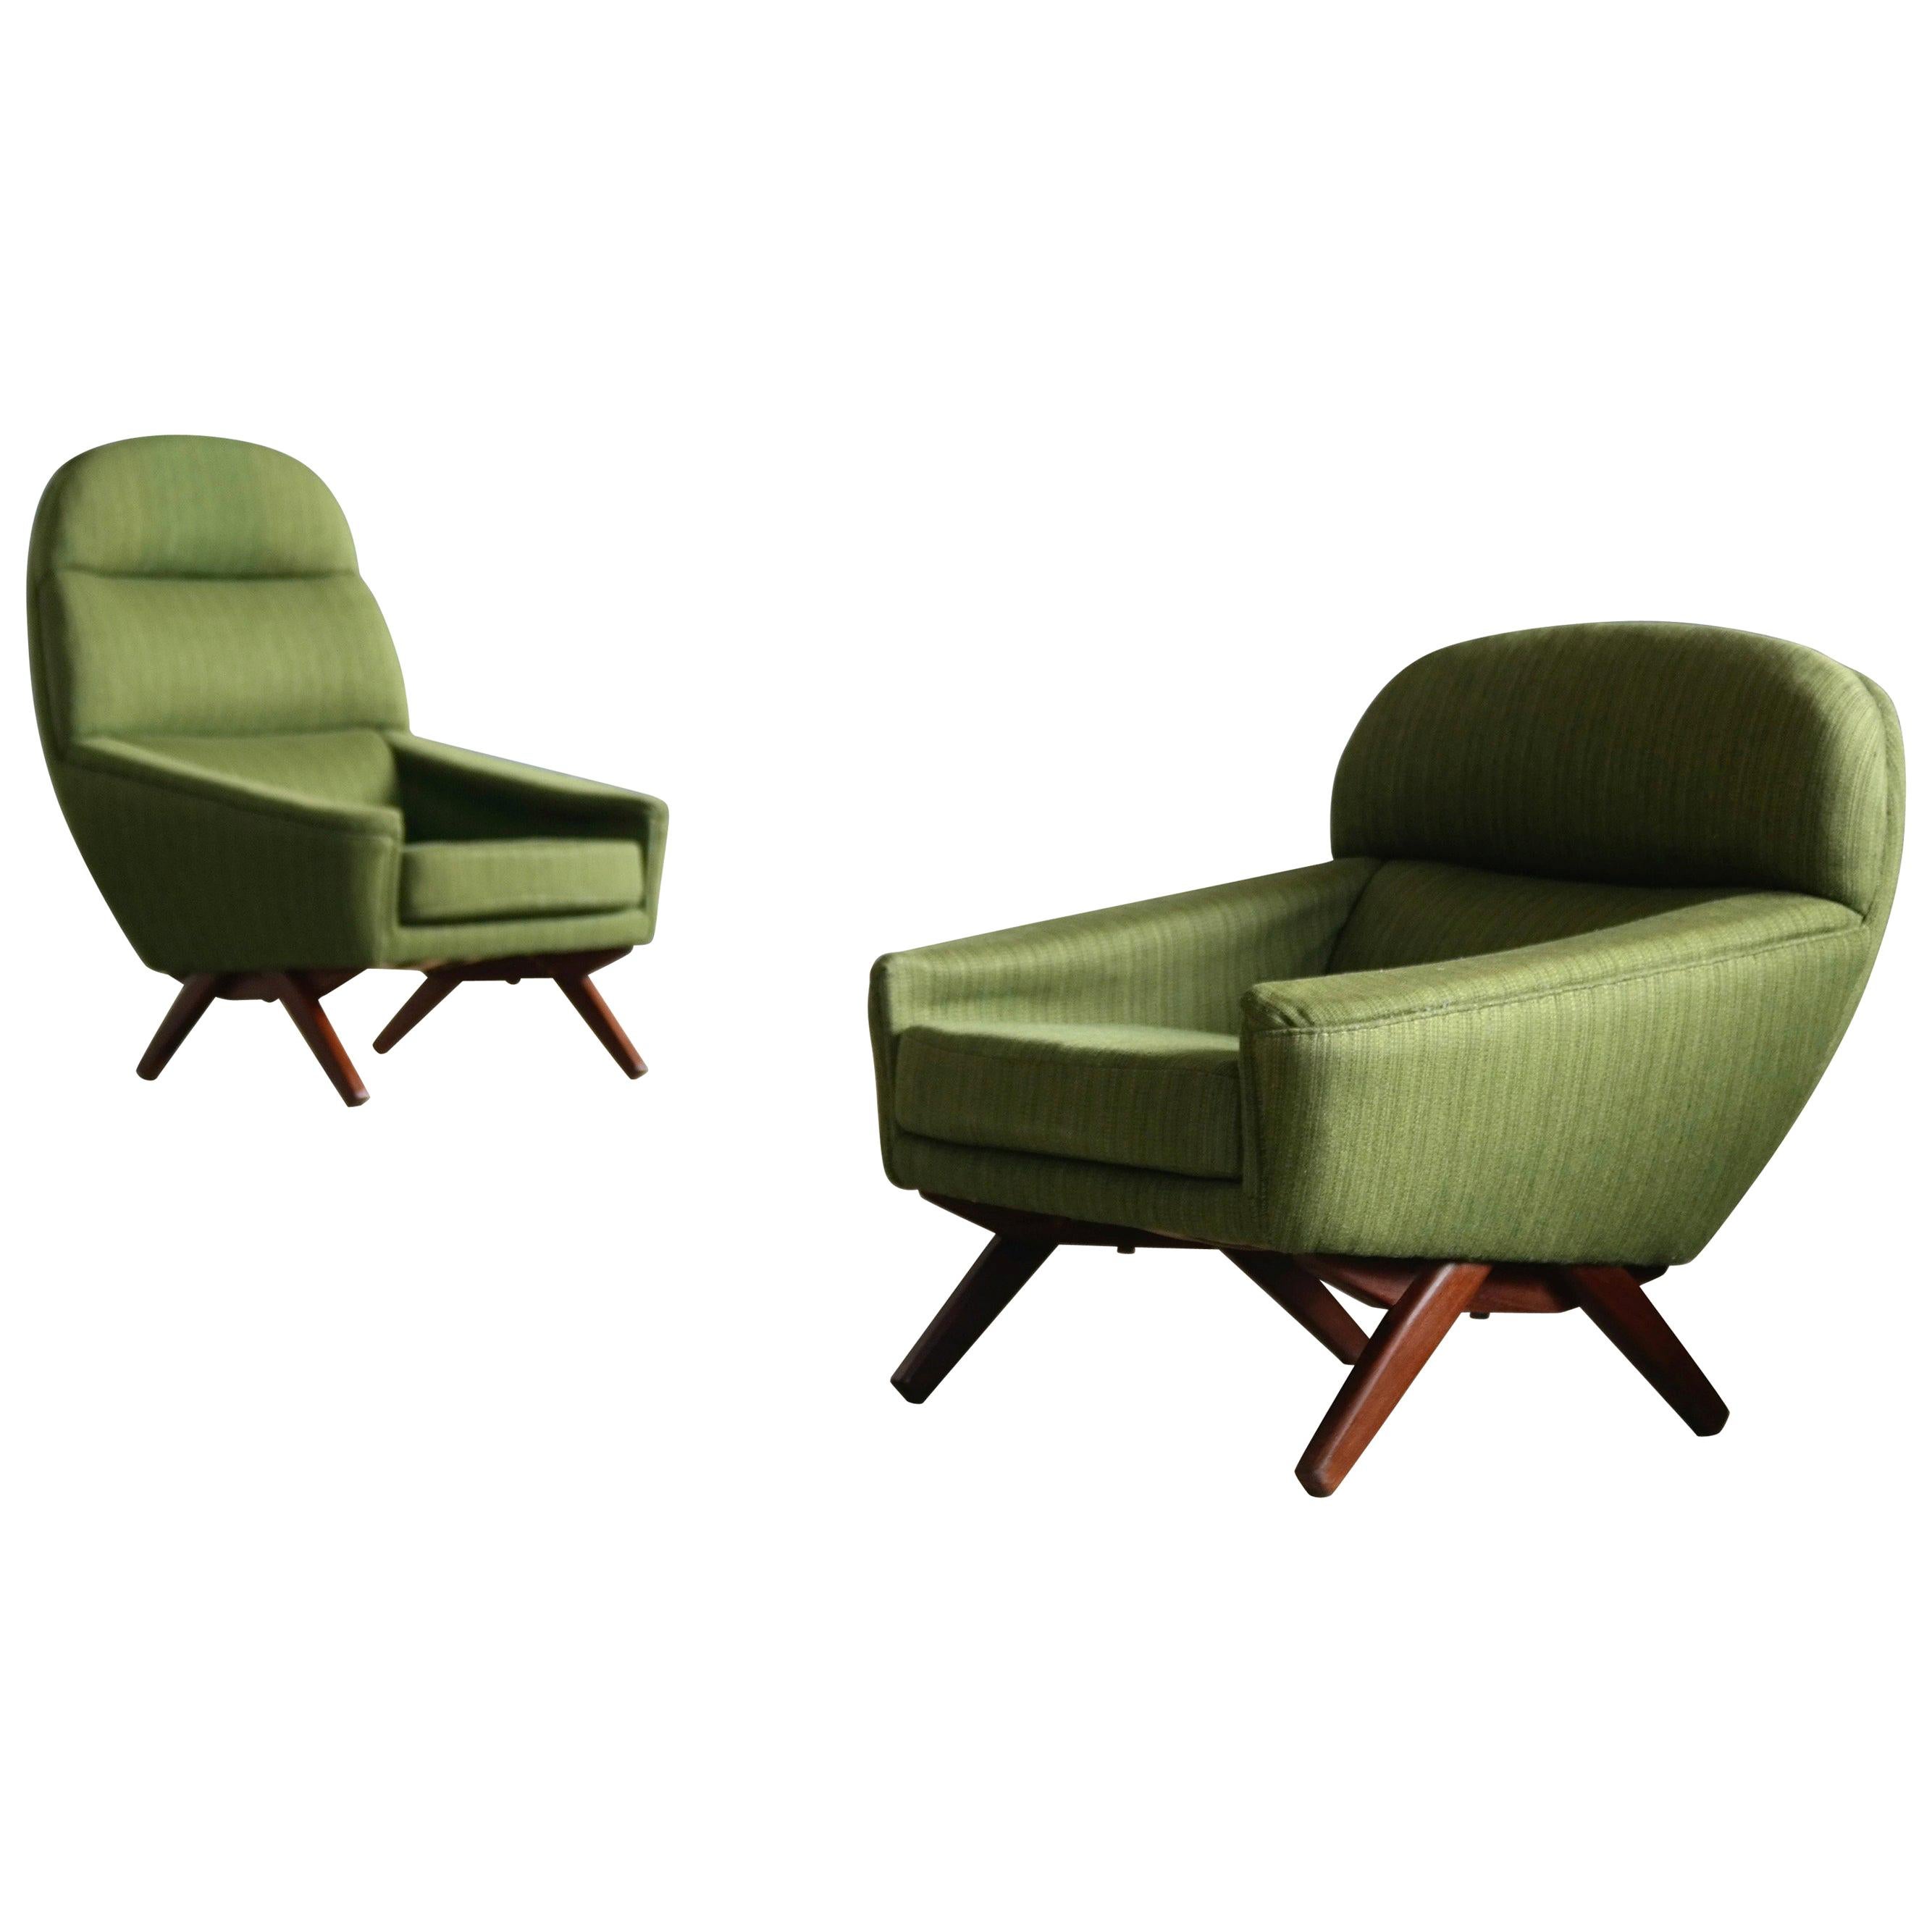 Pair of Danish Illum Wikkelso Style High and Low Lounge Chairs by Leif Hansen